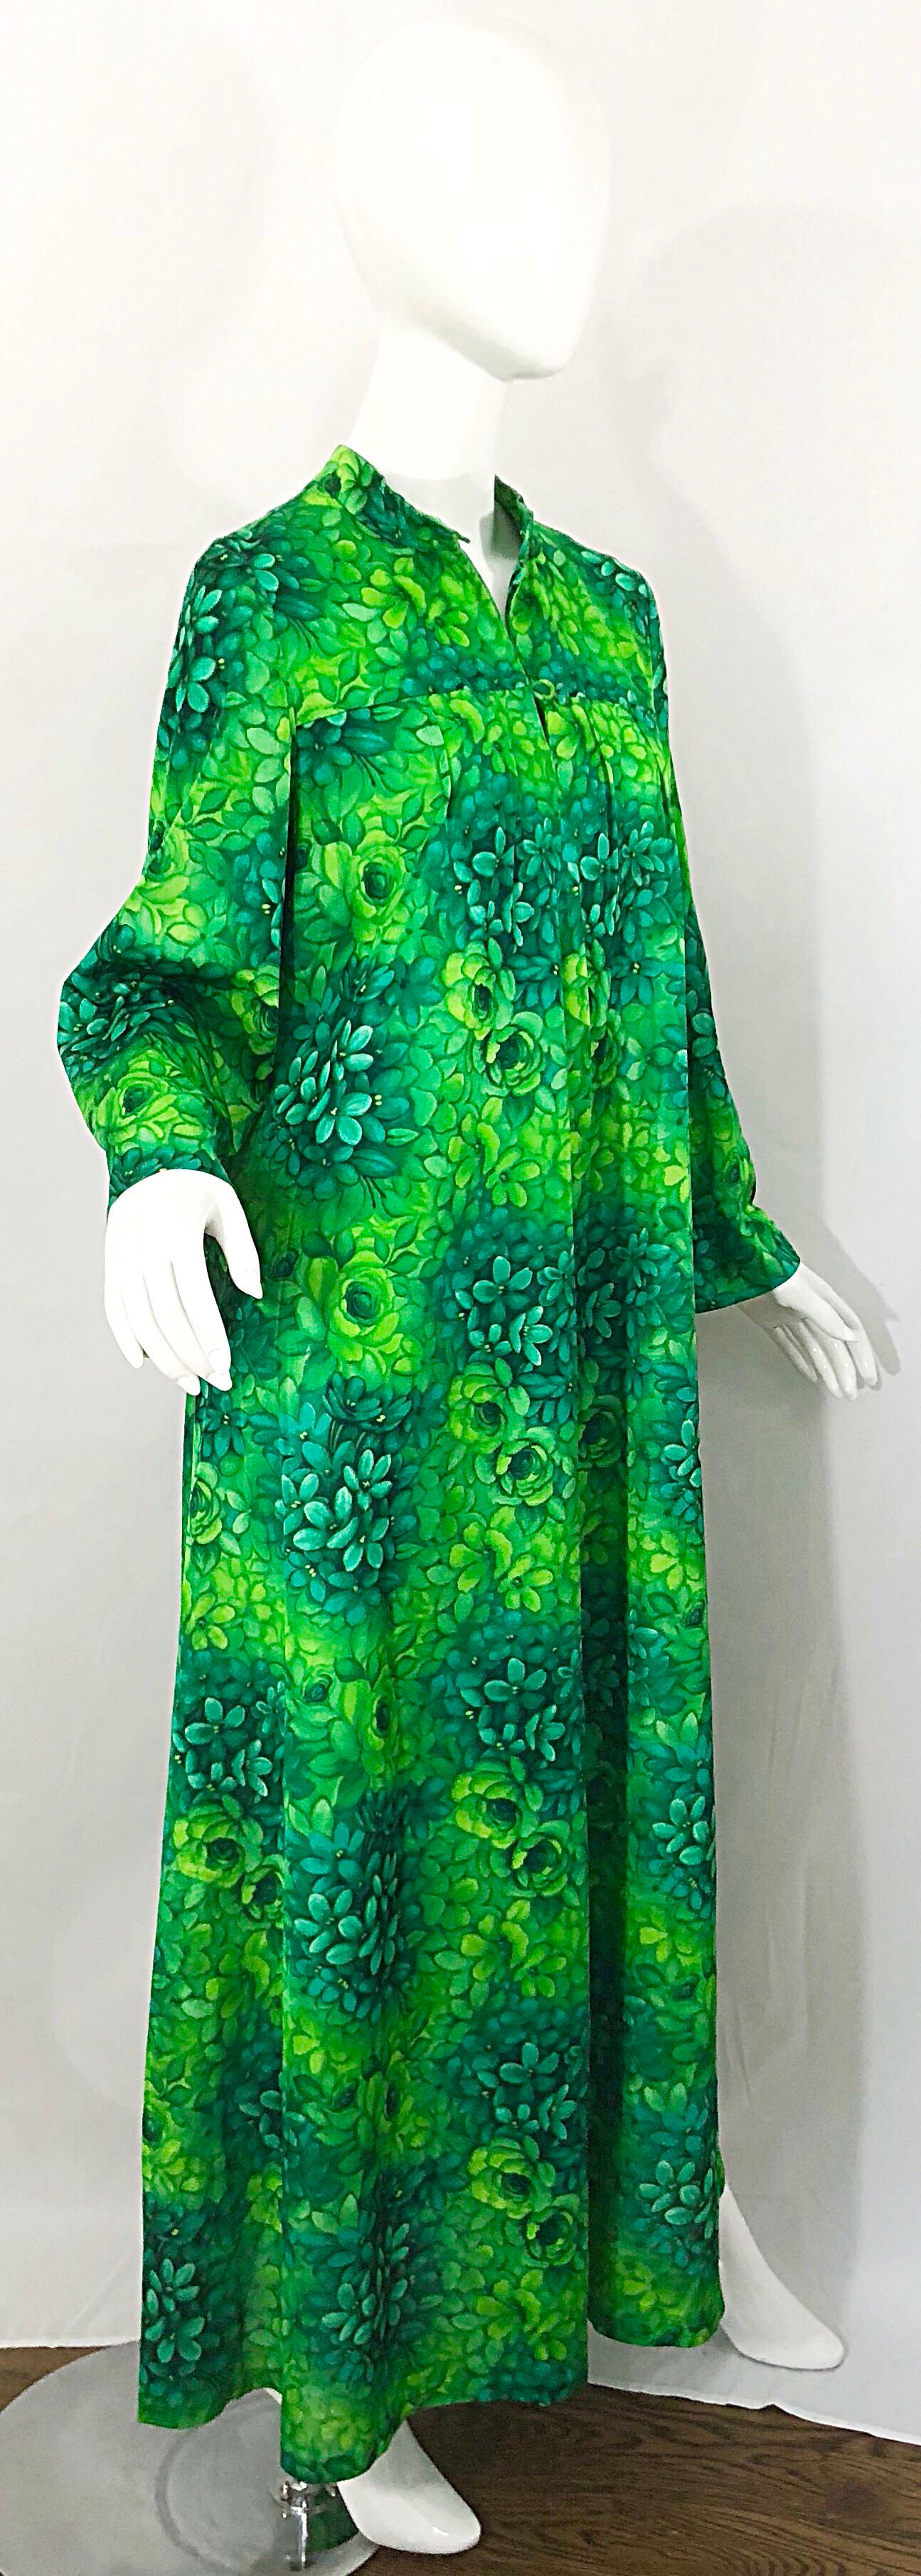 Amazing 1970s Neon + Kelly Green Abstract Flower Print 70s Vintage Caftan Dress 5